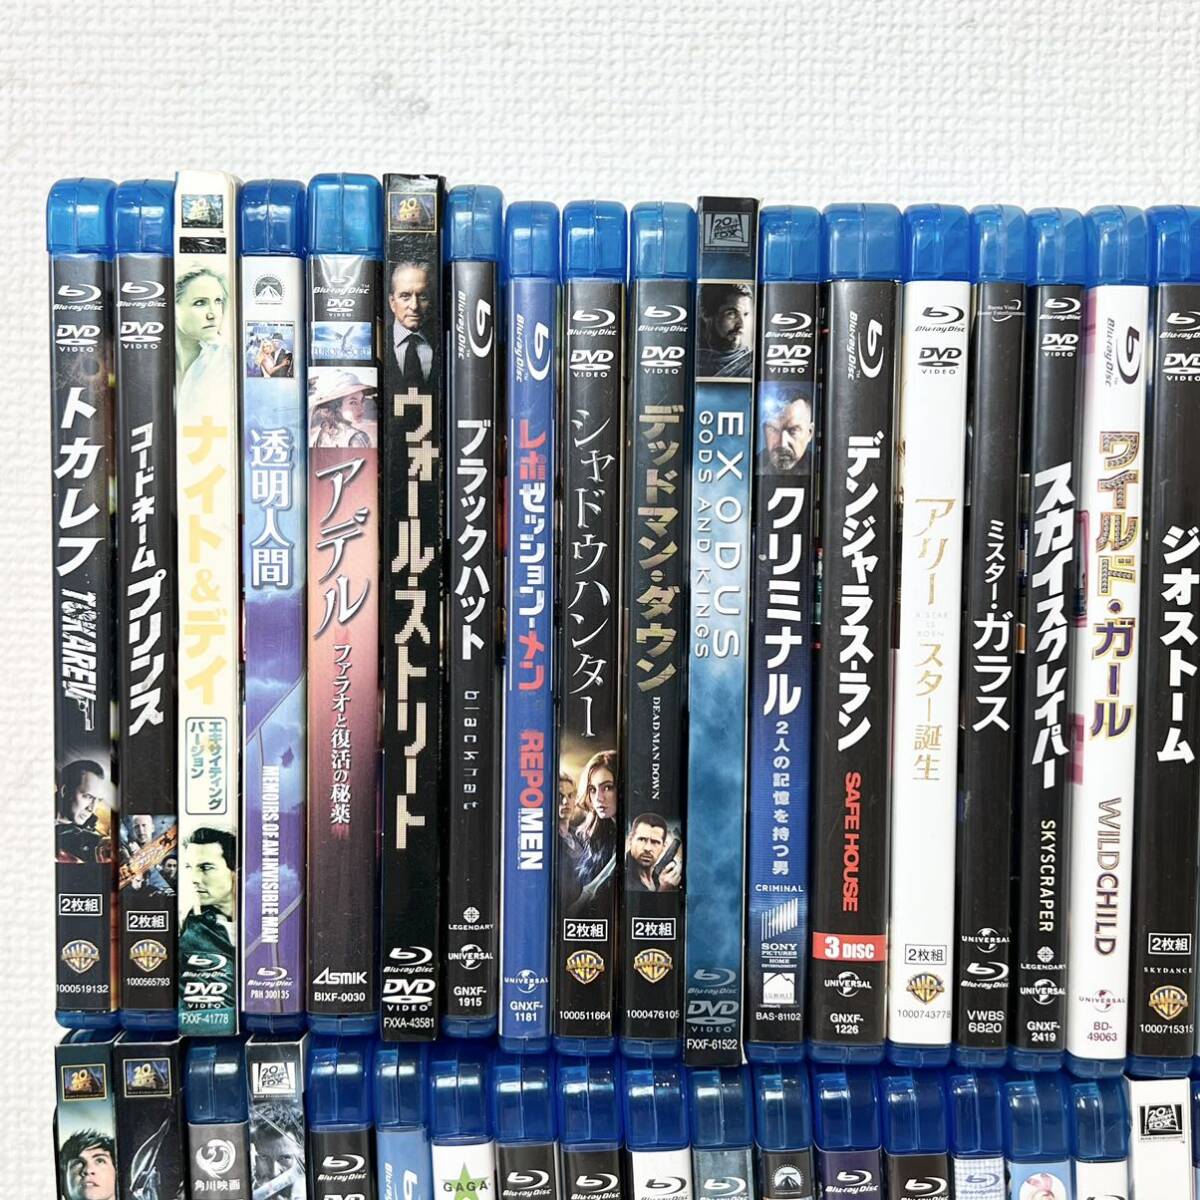 247* secondhand goods Blue-ray Blu-ray DVD summarize large amount genre various Rocket man / Planet of the Apes /jupita- other operation not yet verification present condition goods *